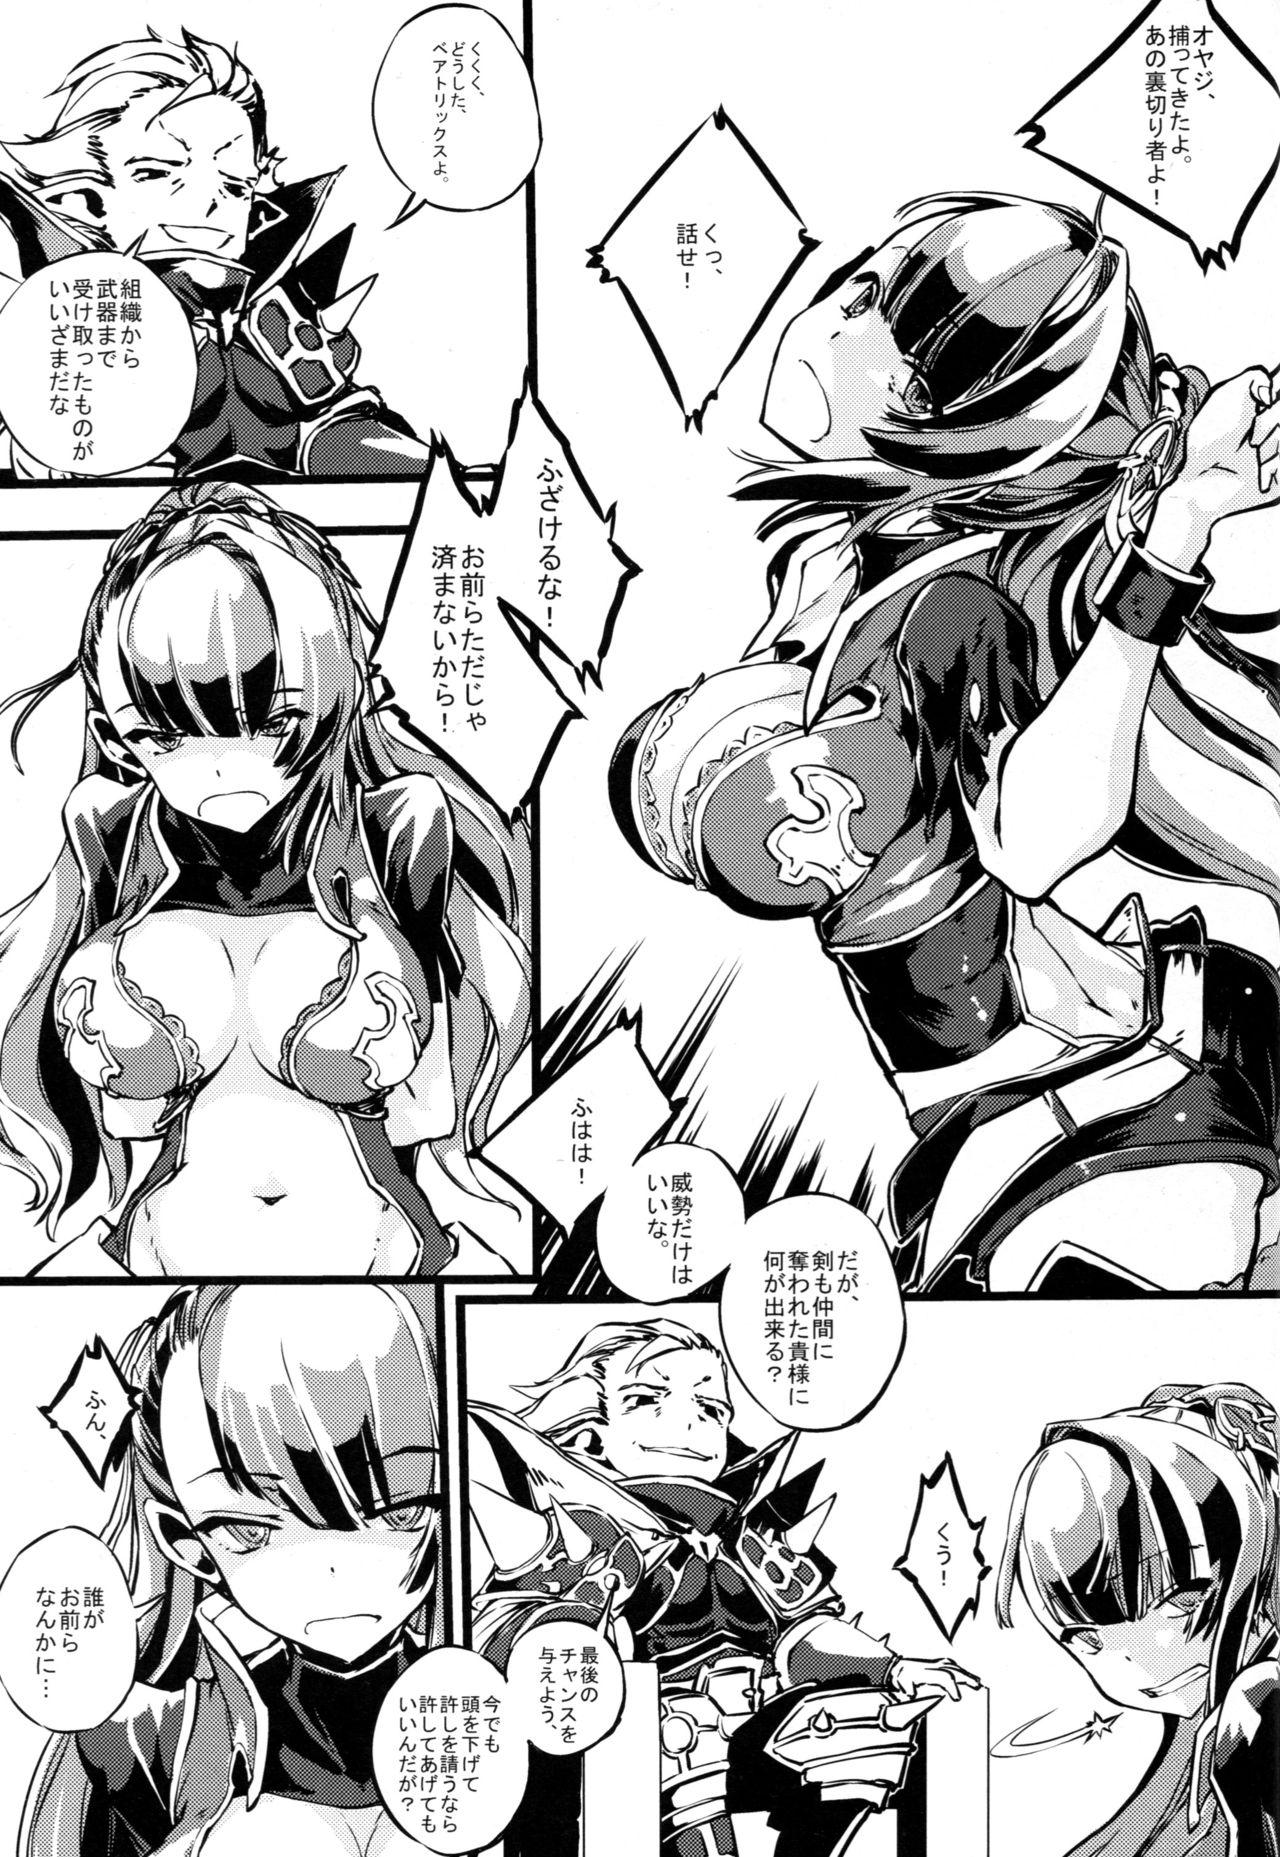 Culote Bad End Catharsis Vol.3 - Granblue fantasy Teenporn - Page 2